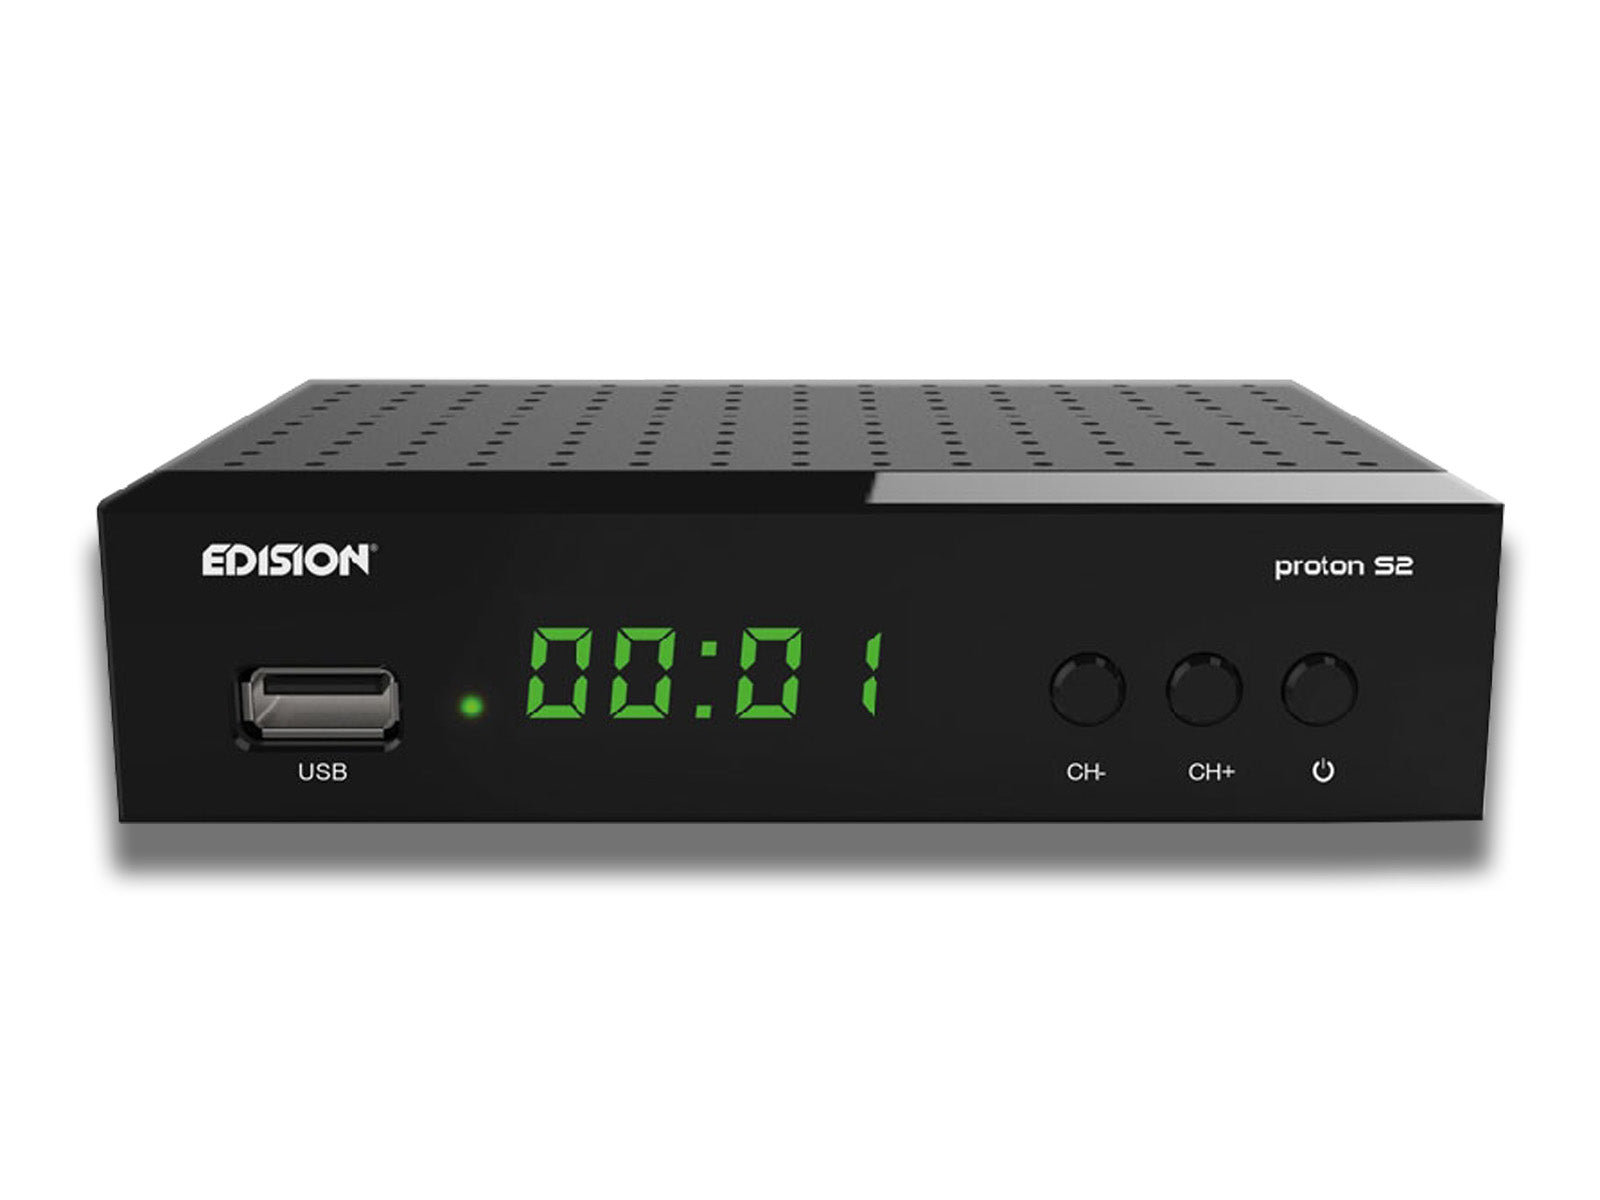 Image shows a front view of the Edision Proton S2 Satellite Receiver